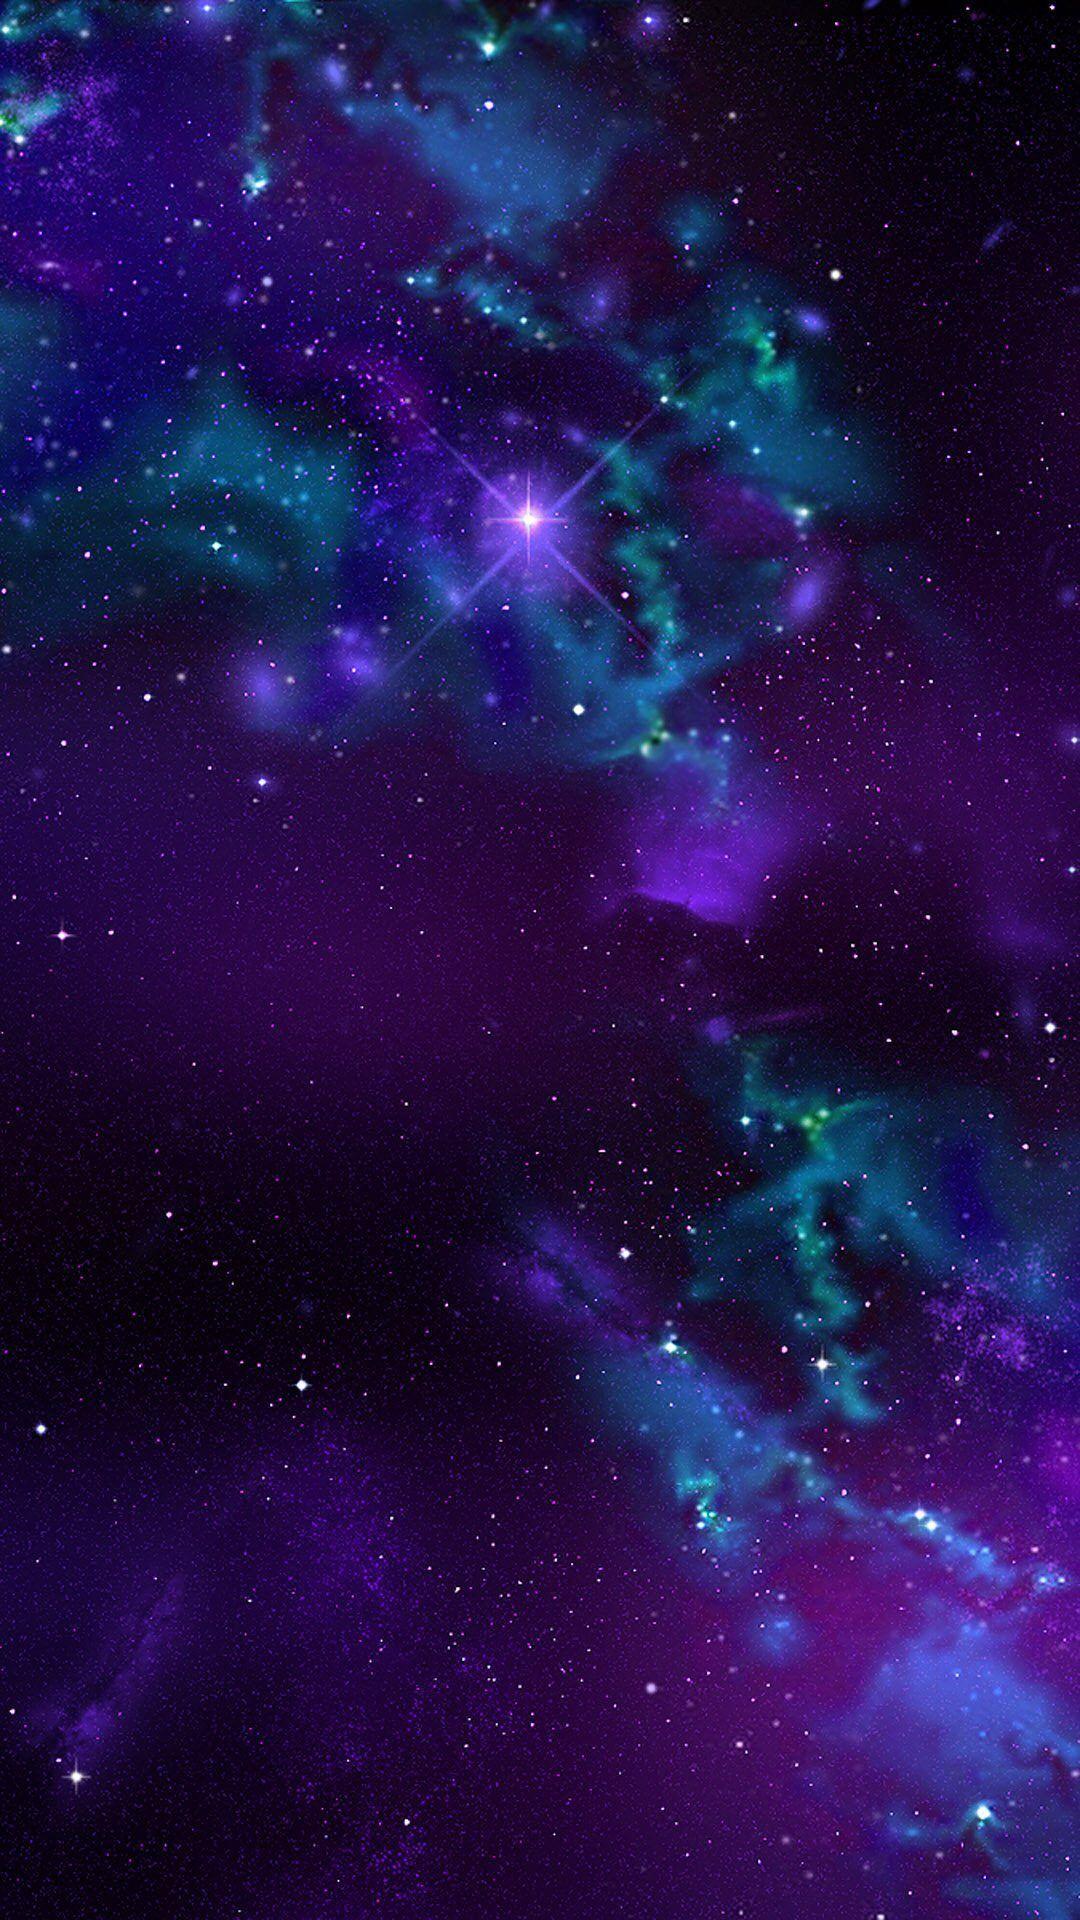 galaxy hd wallpapers 1080p for iphone